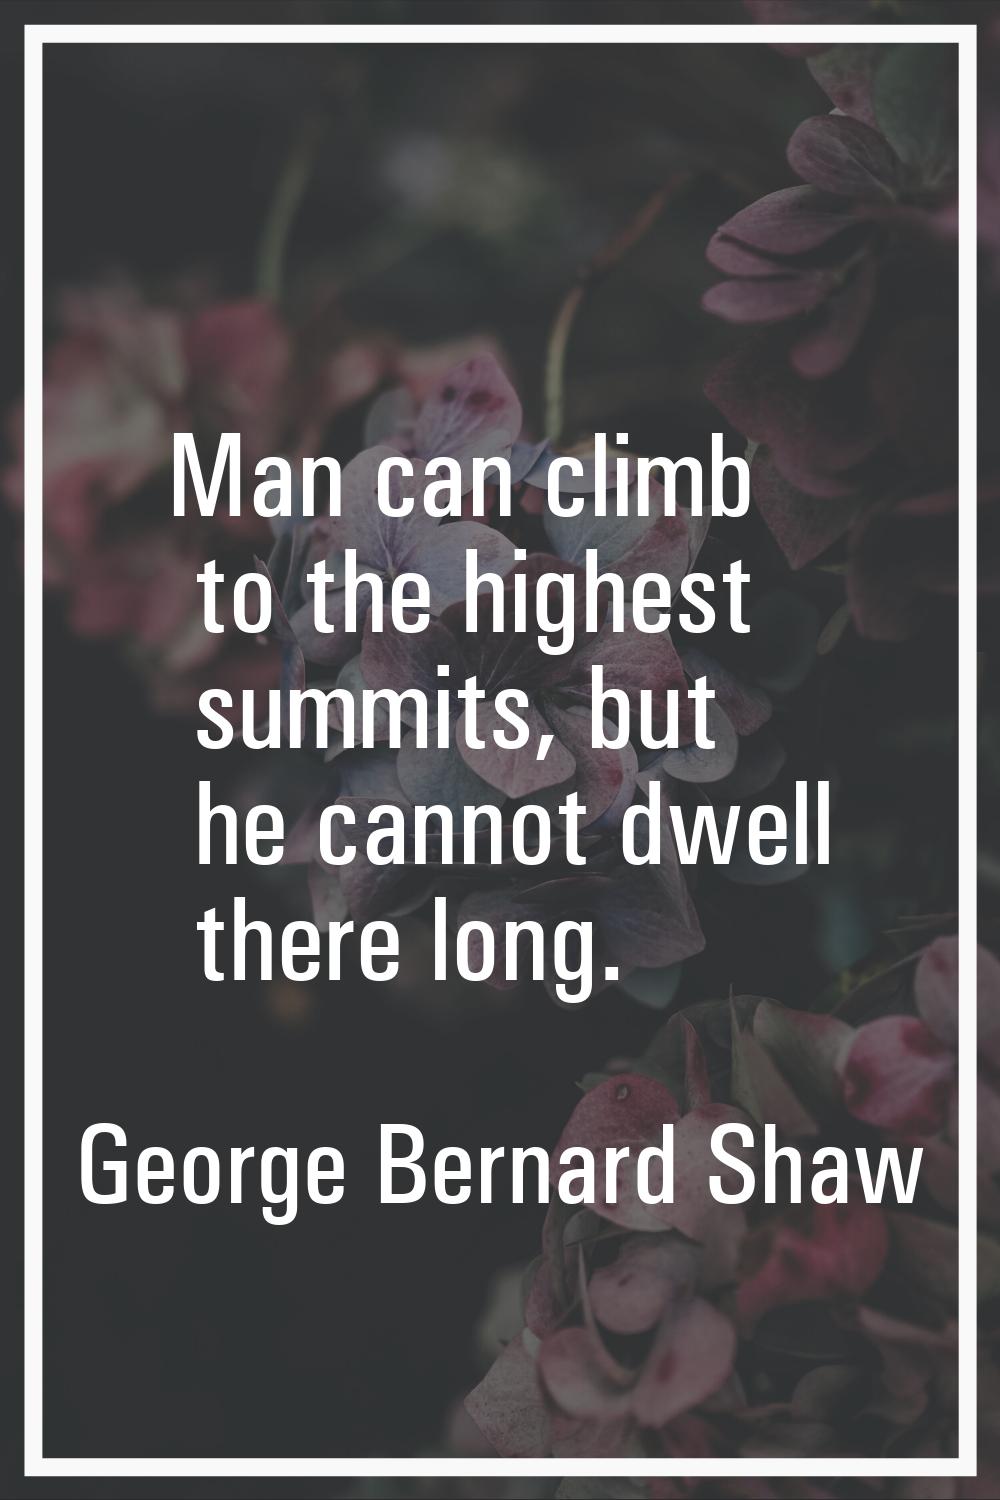 Man can climb to the highest summits, but he cannot dwell there long.